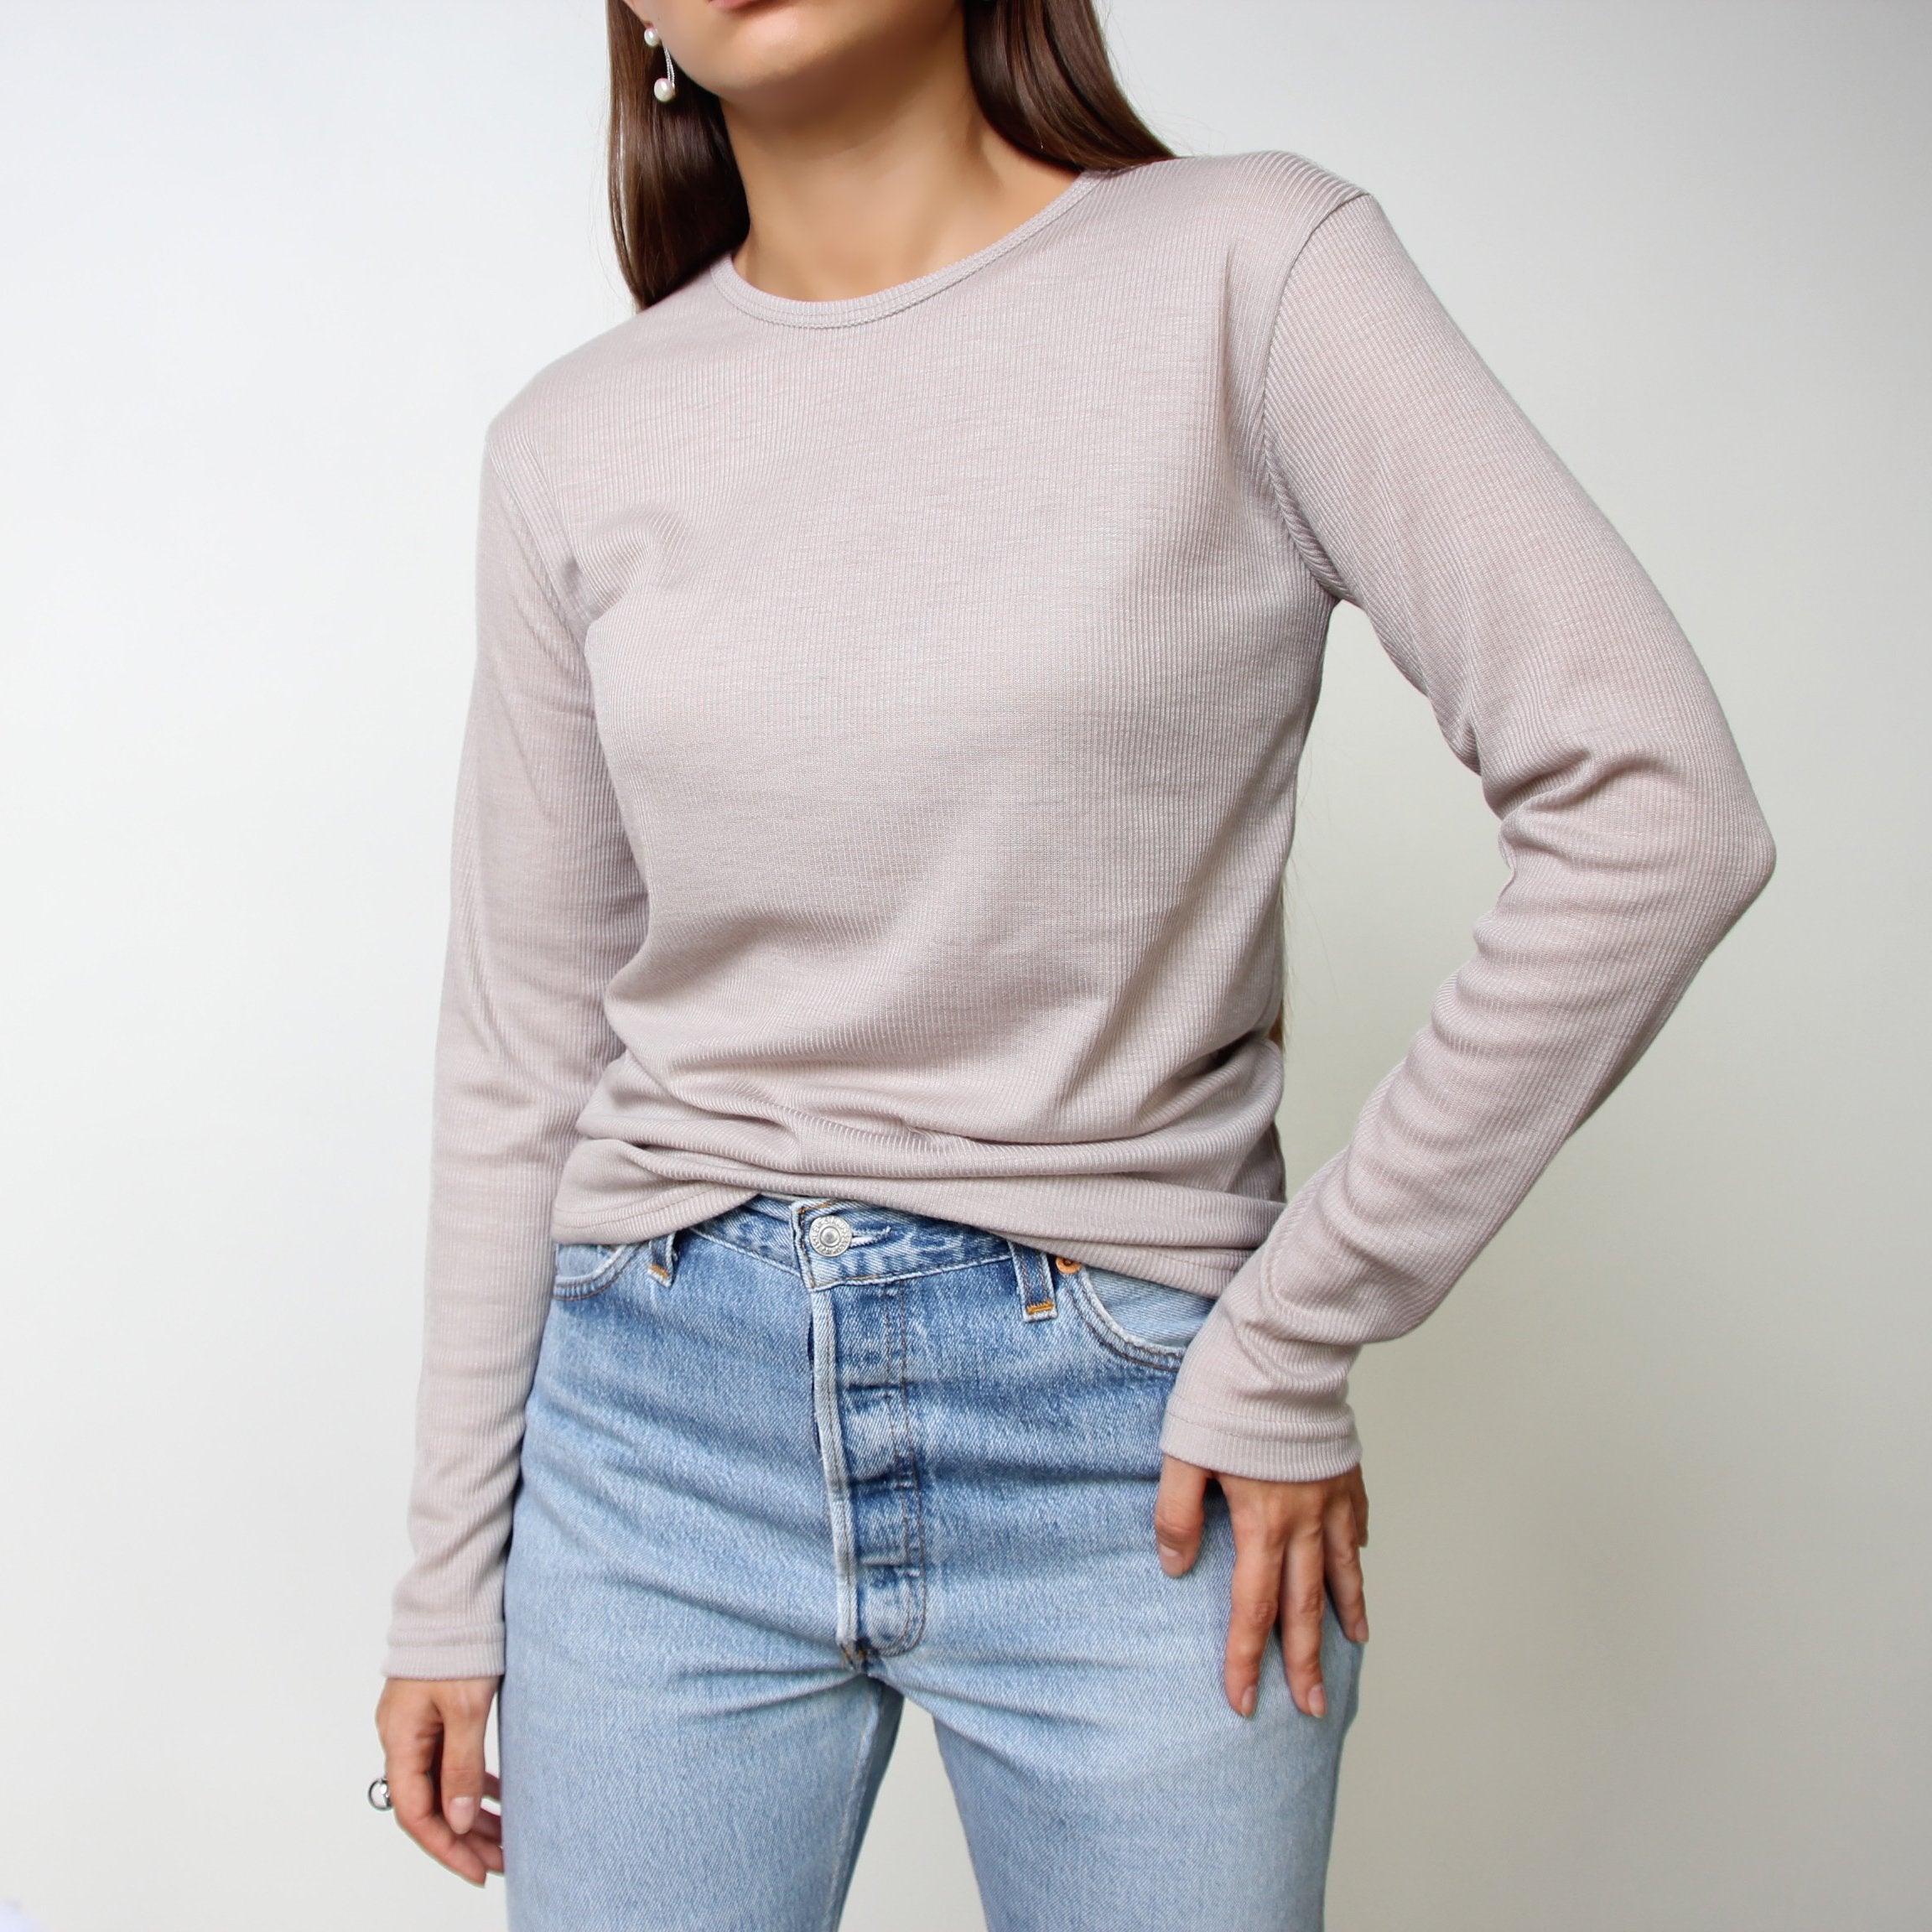 Womens - Ashby Long Sleeve Lace Hem Top in Soft Grey Marl